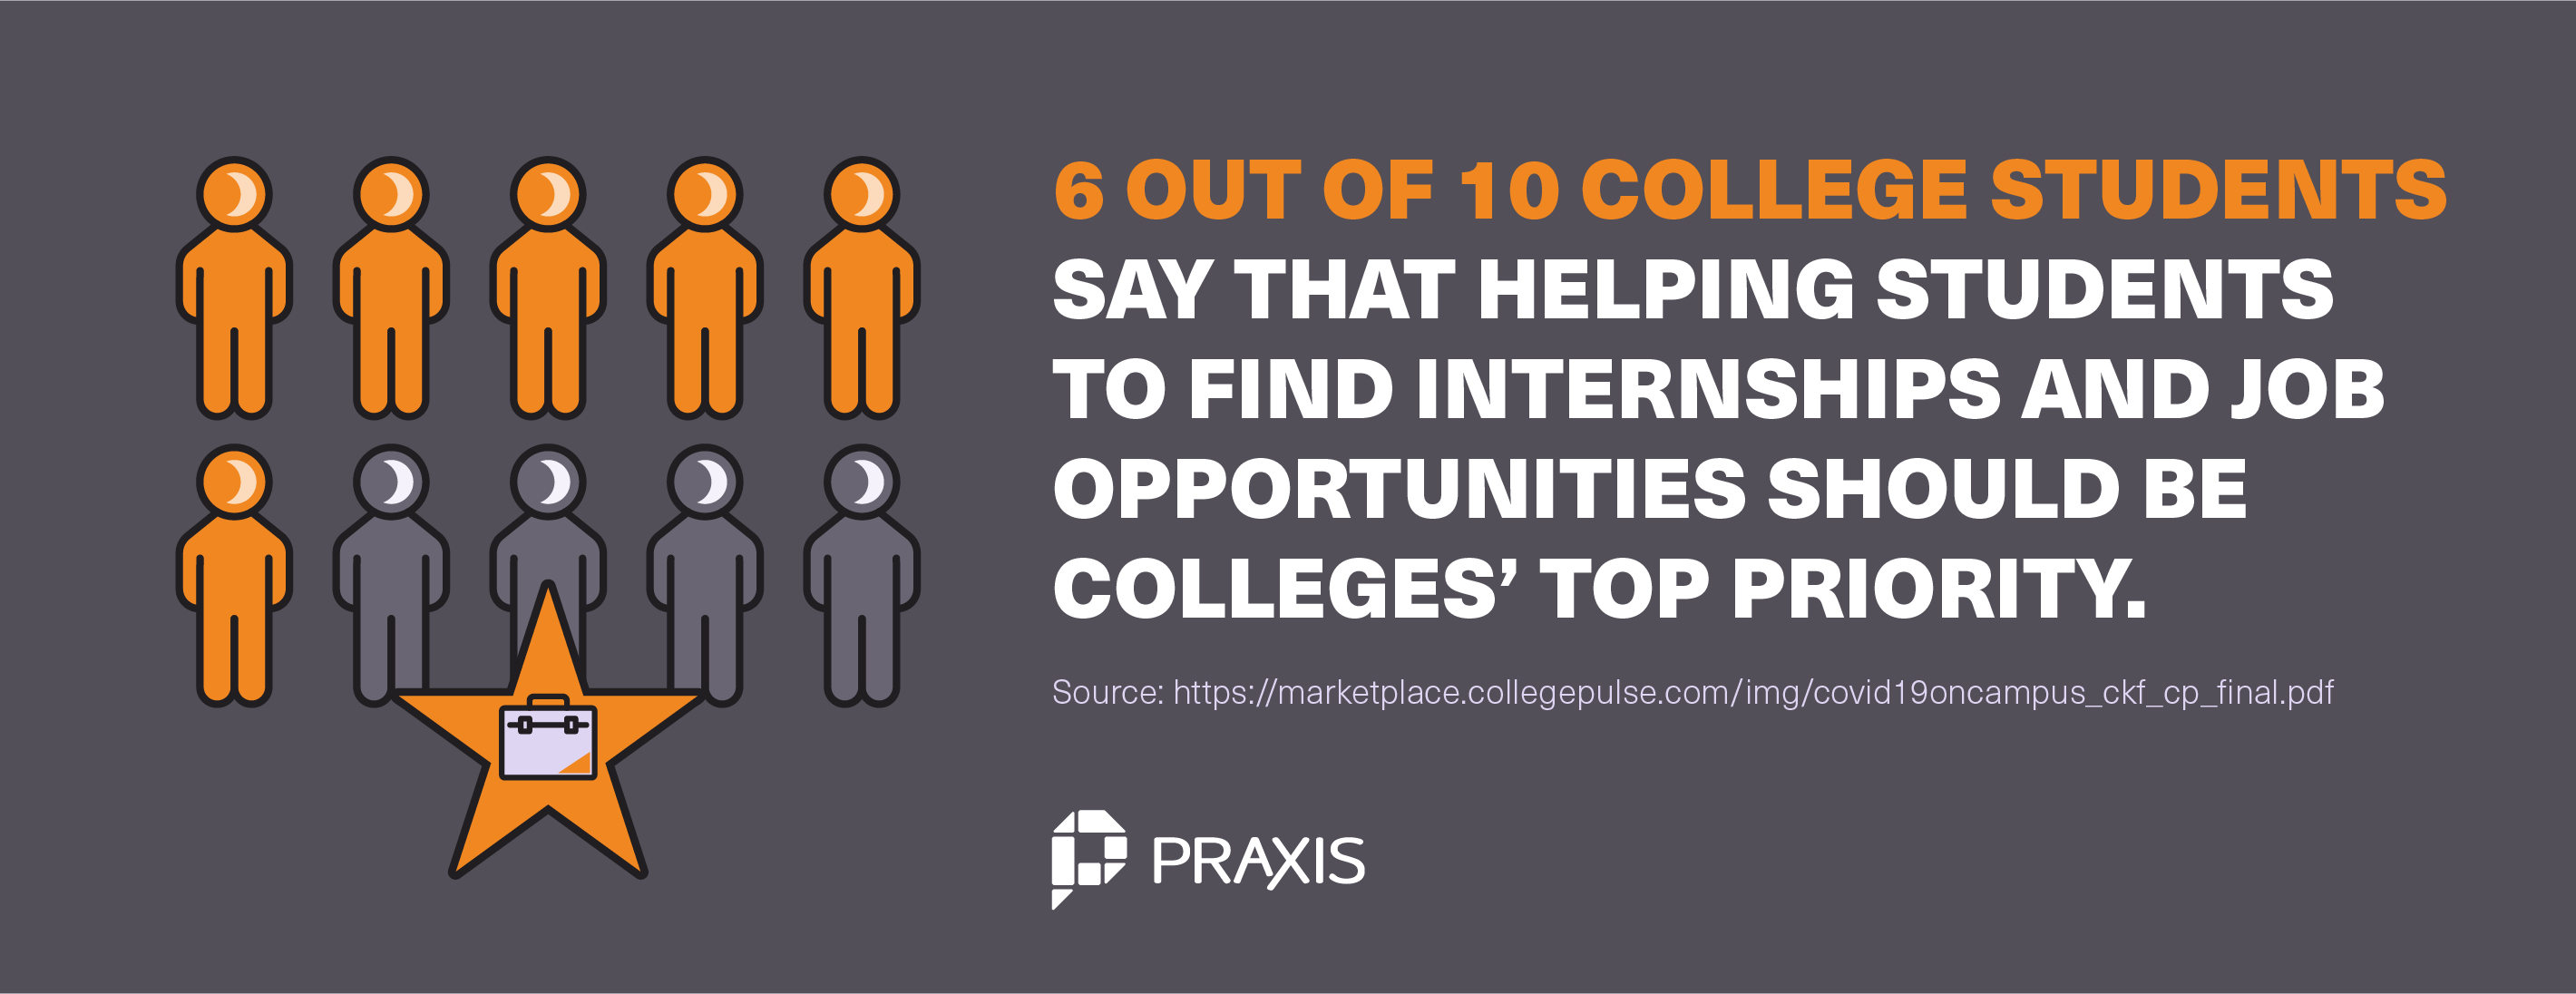 6 out of 10 college students say that helping students to find internships and job opportunities should be colleges’ top priority.